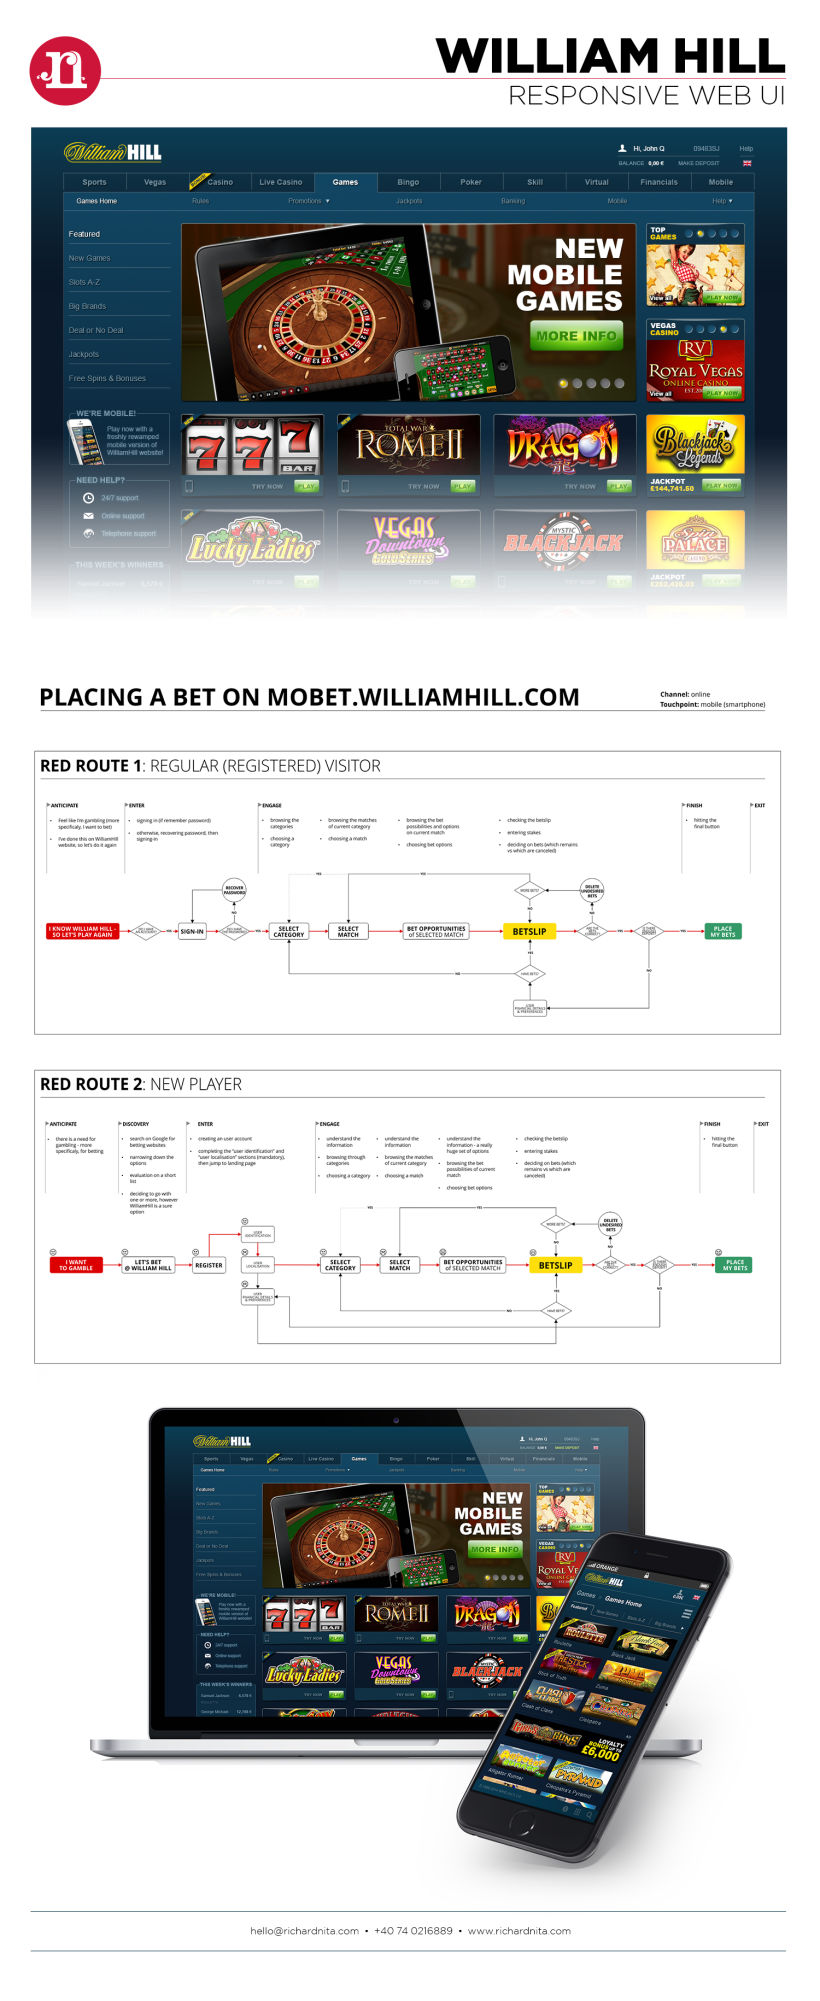 William Hill - red routes, analysis and improvement proposals -1